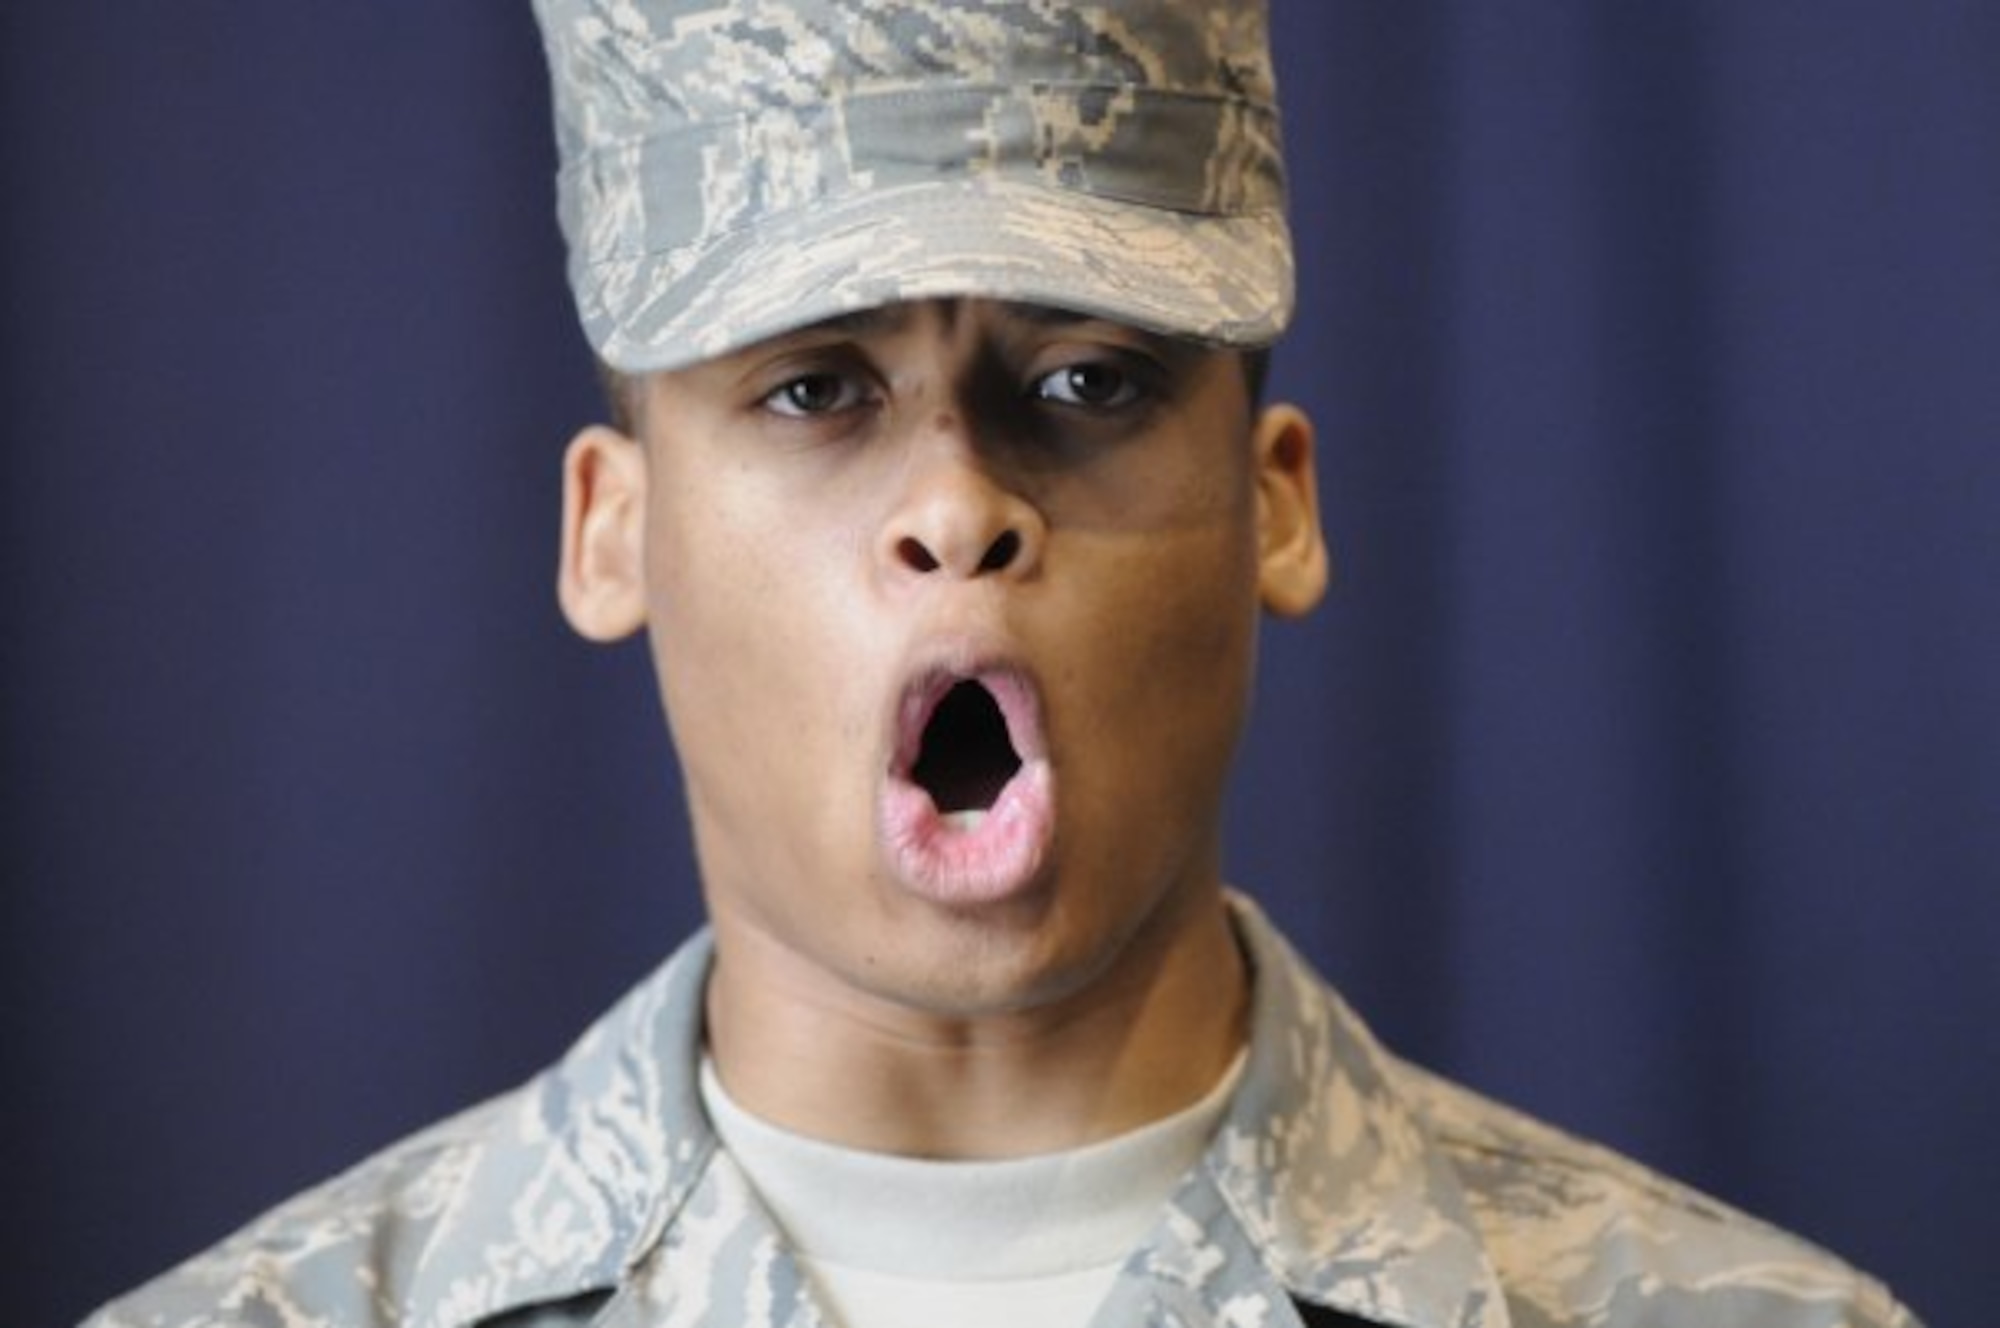 United States Air Force Airman 1st Class William Nealey III, United States Air Force Honor Guard technical school trainee, shows honor guard pride by yelling ‘1-2-3 B Flight, Hooah!’ after completing pre-evaluations, Feb. 22, 2010, inside the Honor Guard's C Hall on Bolling Air Force Base, D.C. Throughout technical school, trainees will need to pass four evaluations in order to become a member of the honor guard. (U.S. Air Force photo by Senior Airman Marleah Miller)